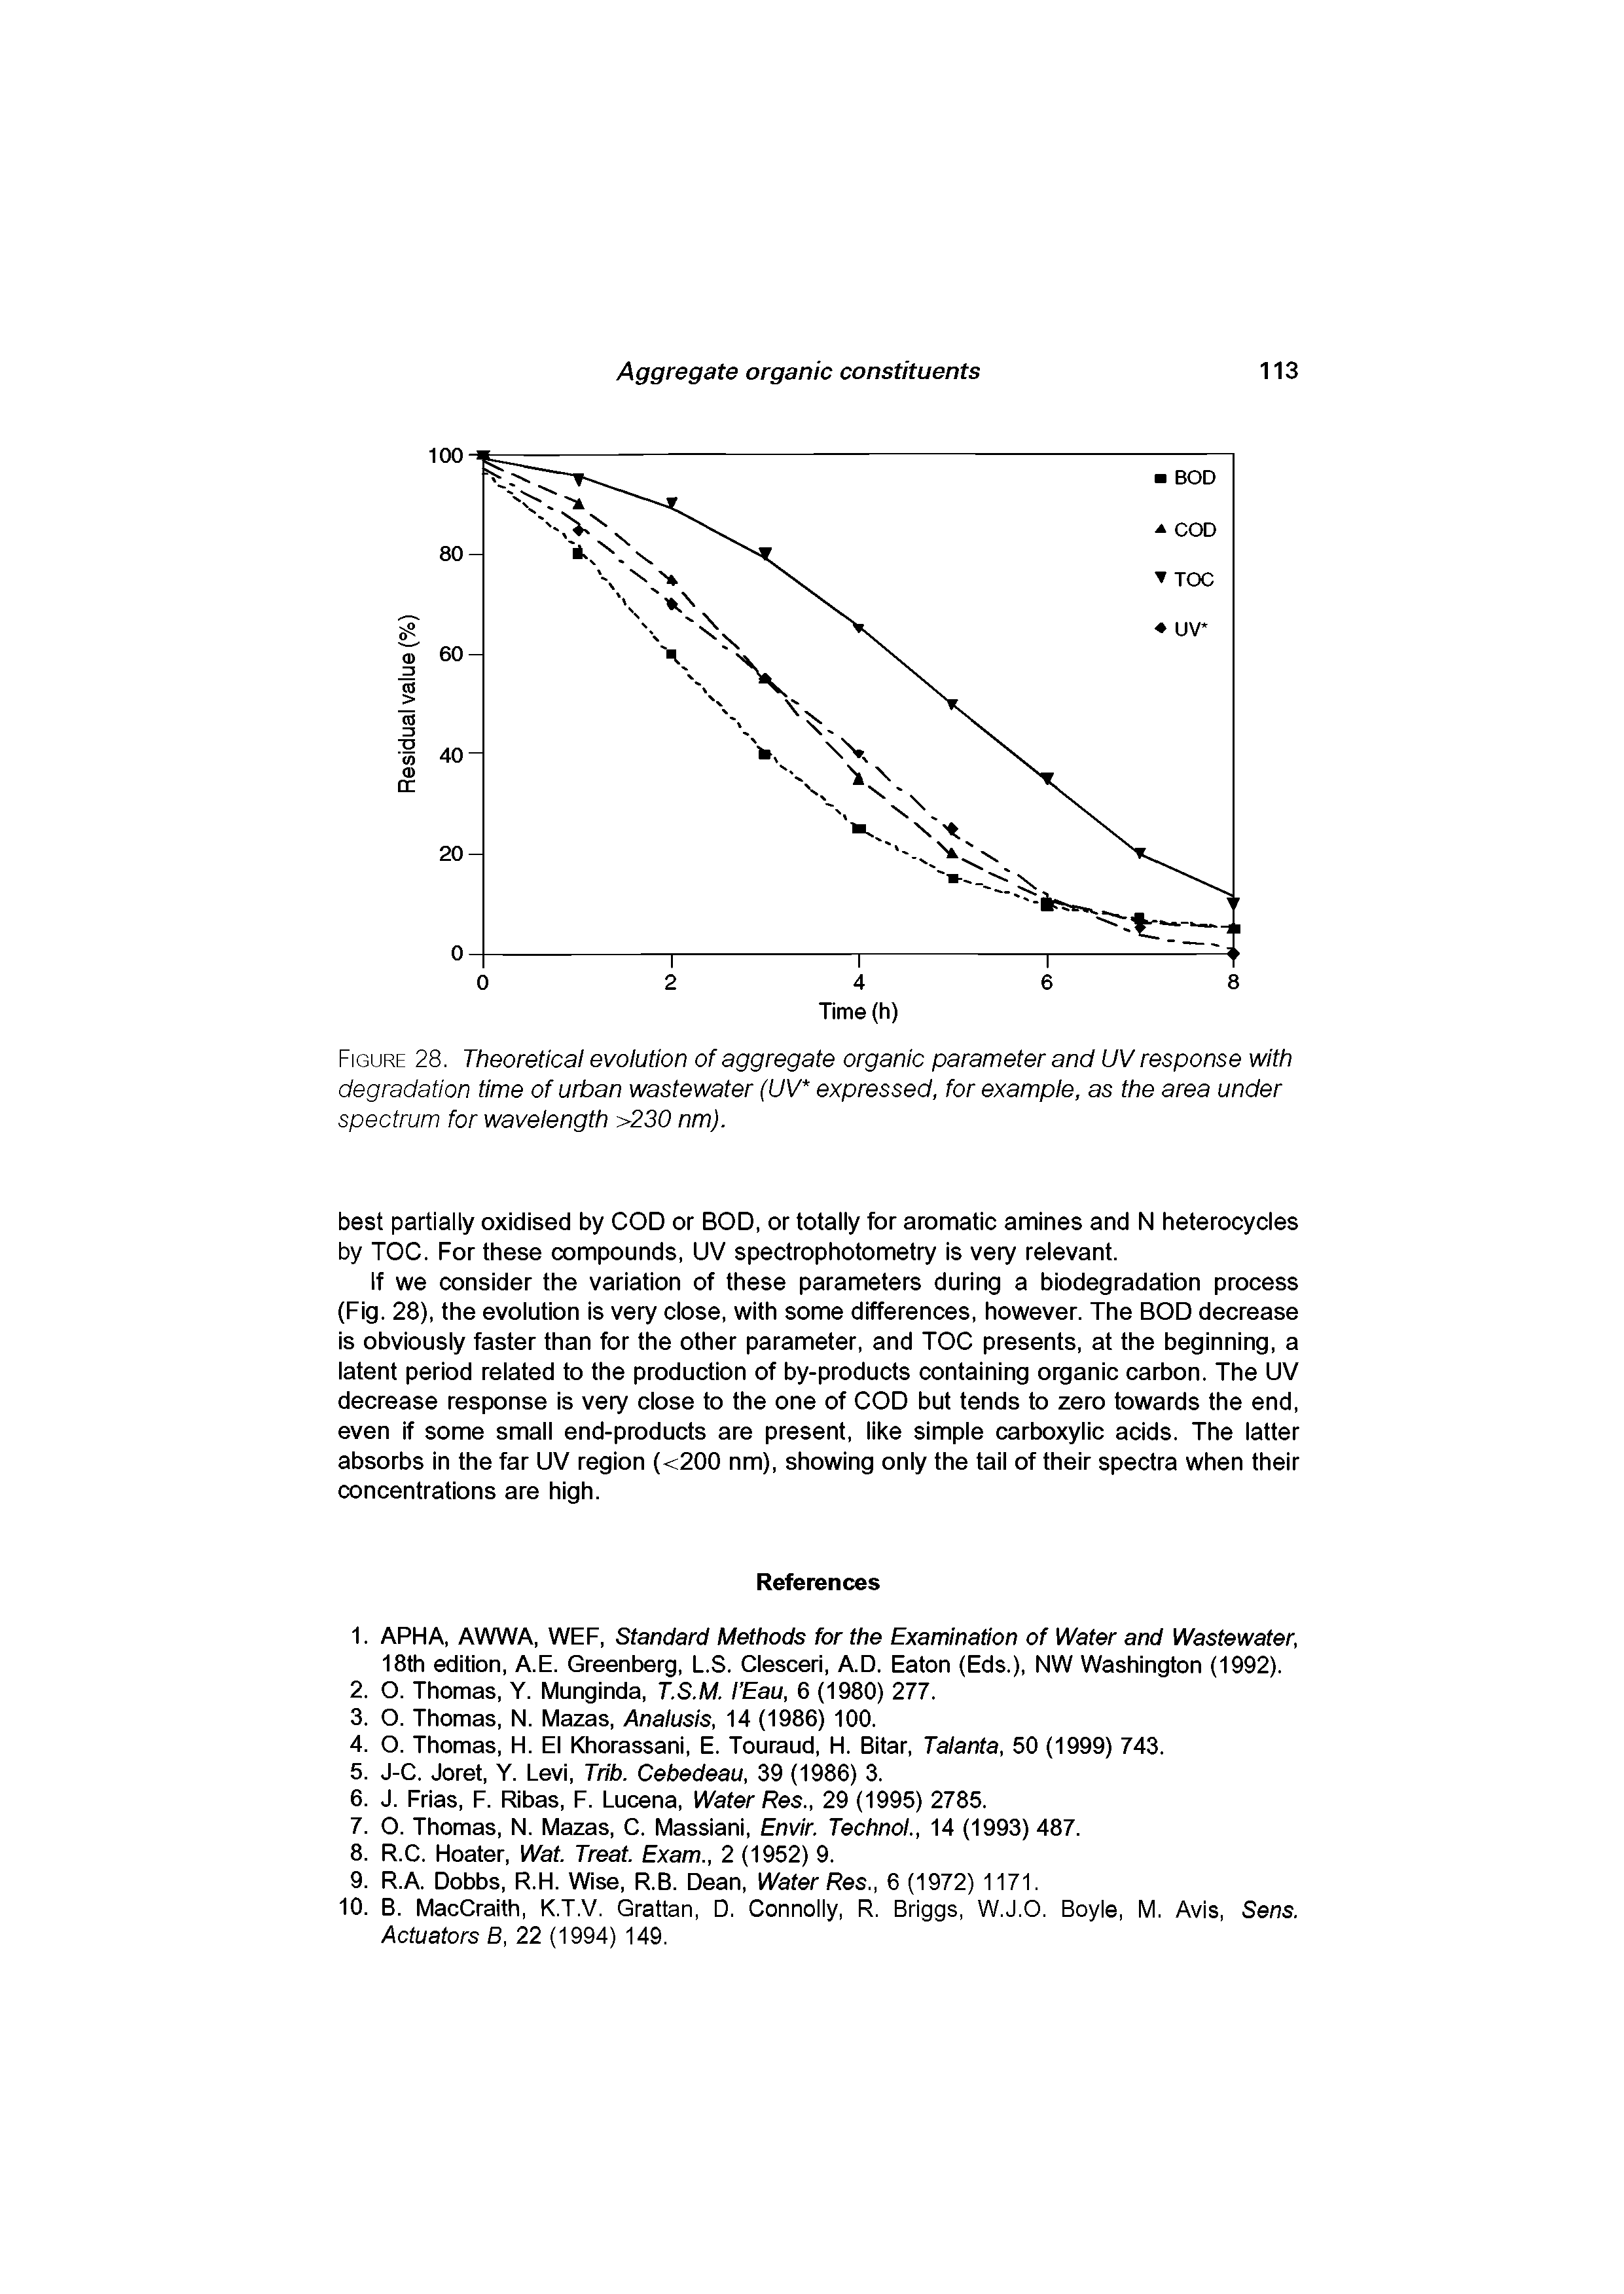 Figure 28. Theoretical evolution of aggregate organic parameter and UV response with degradation time of urban wastewater (UV expressed, for example, as the area under spectrum for wavelength >230 nm).